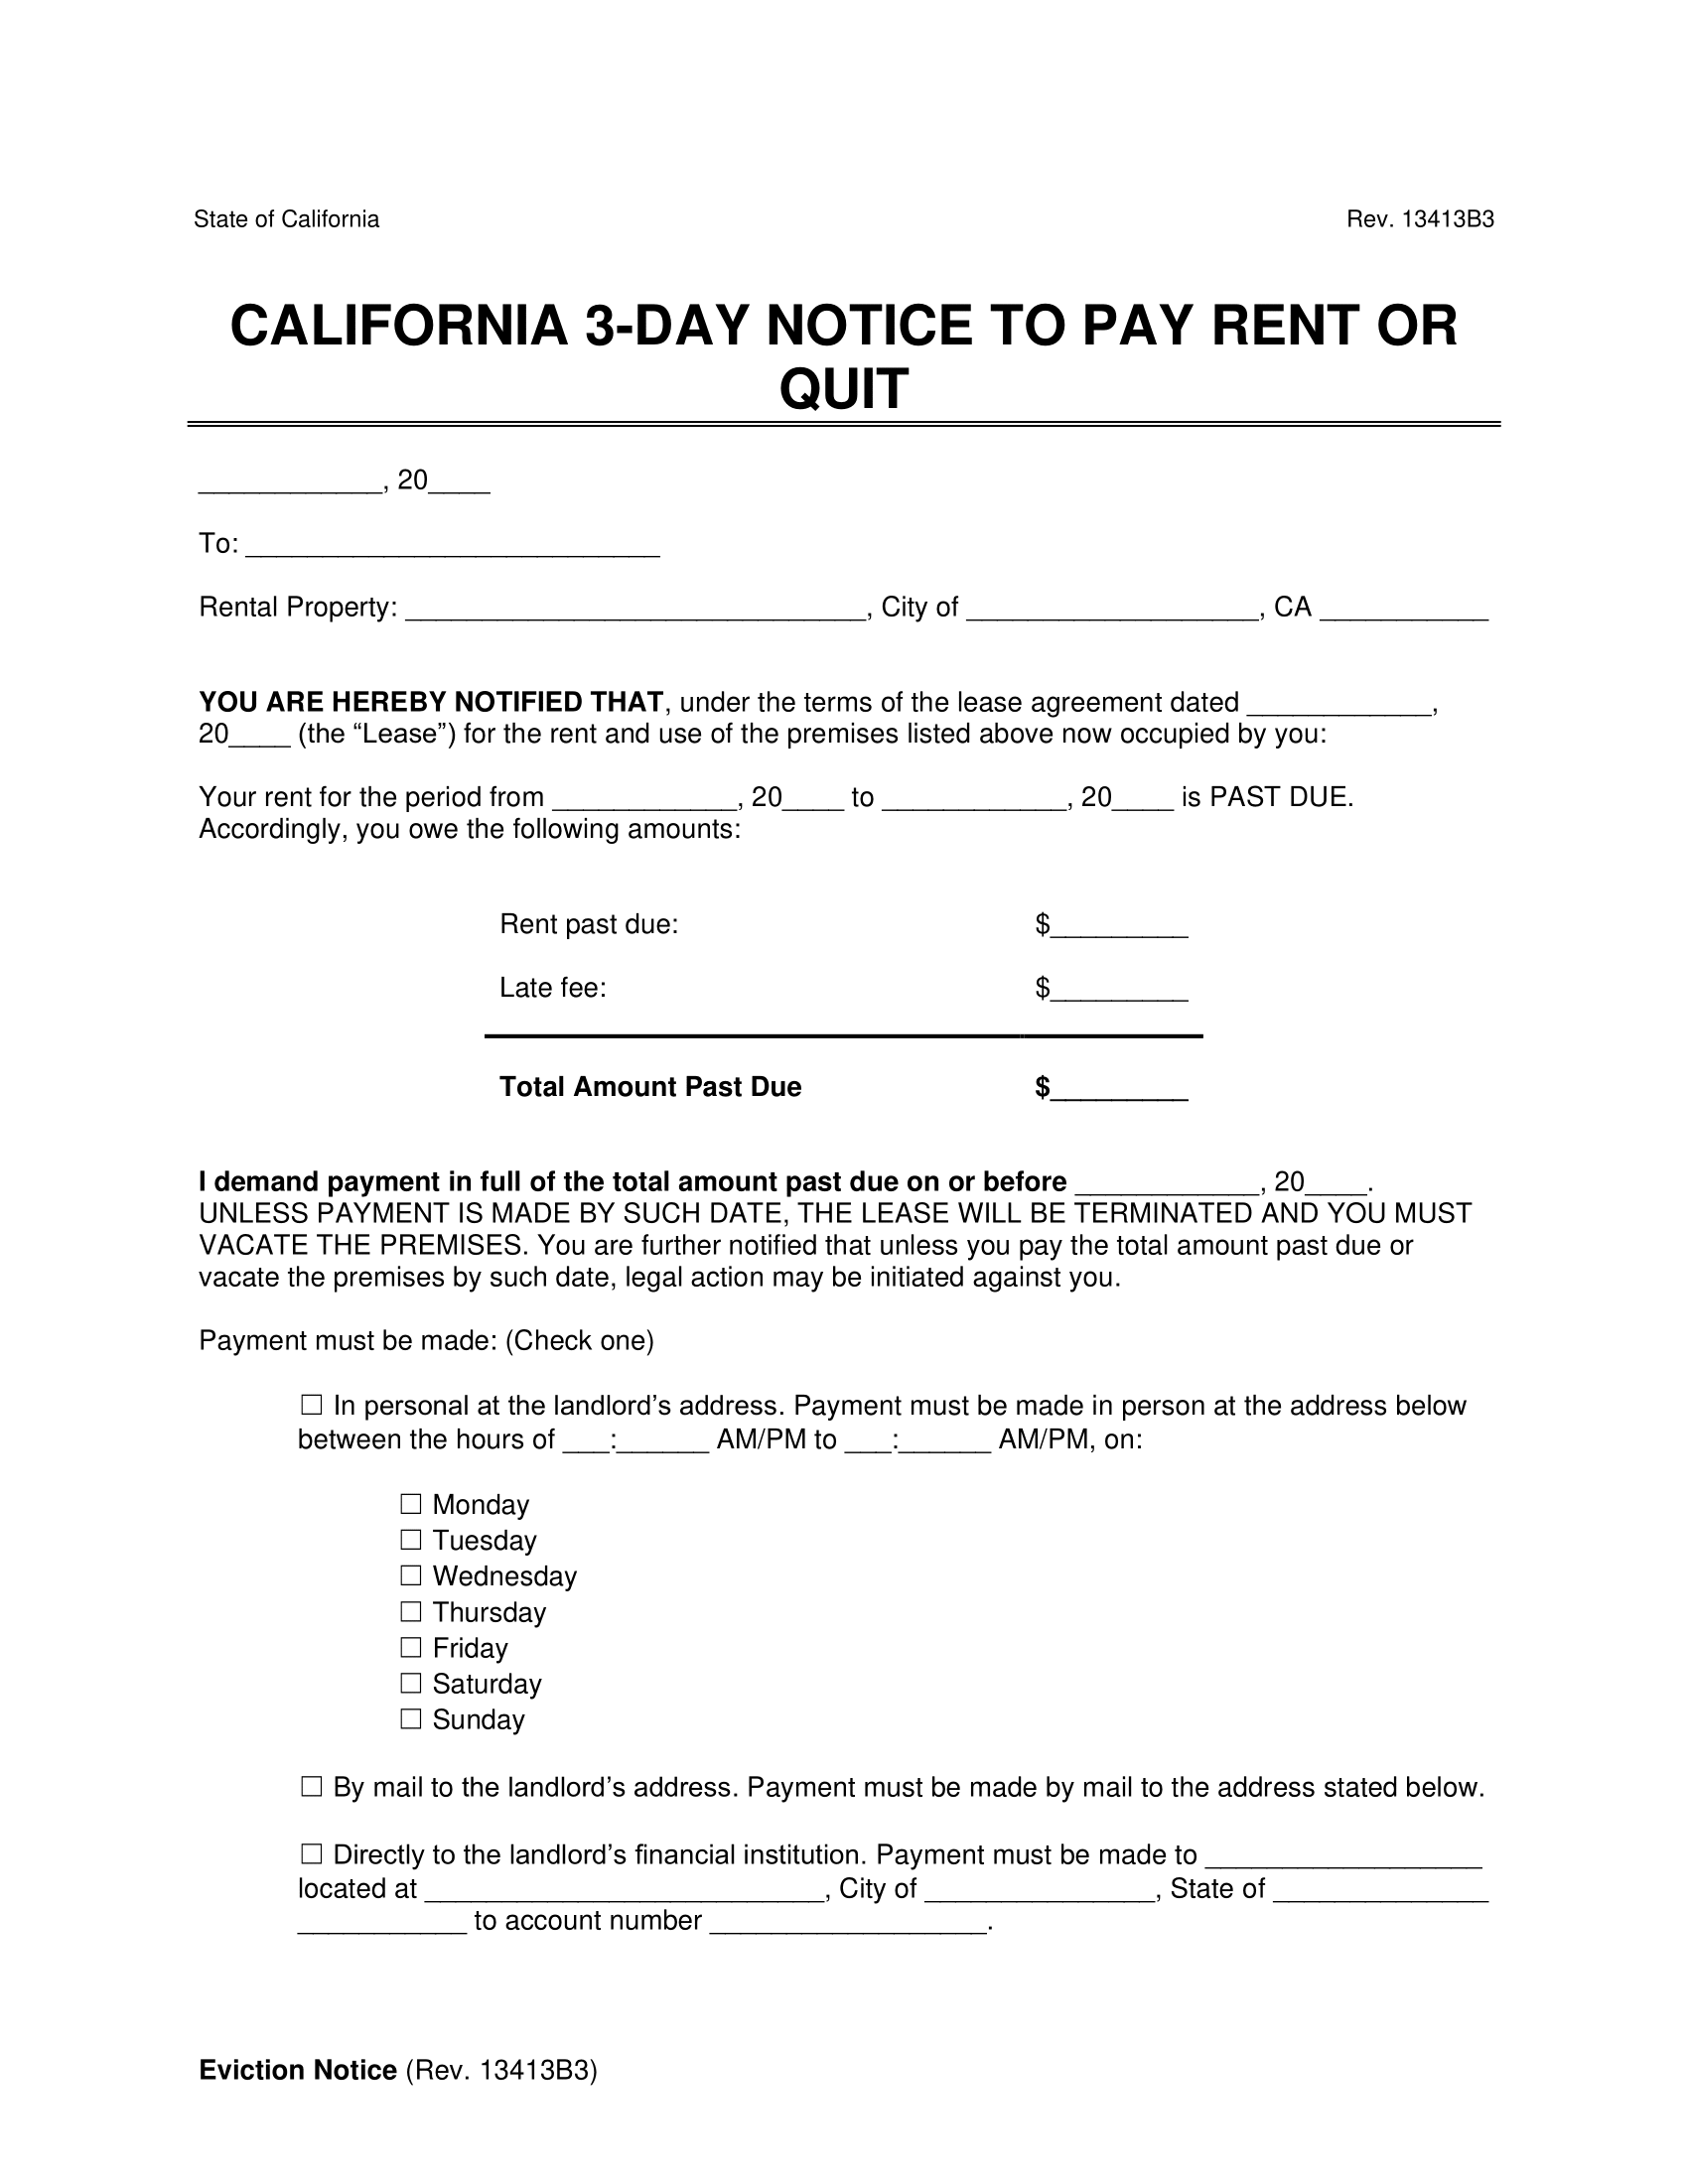 California 3-Day Notice to Quit for Non-Payment of Rent